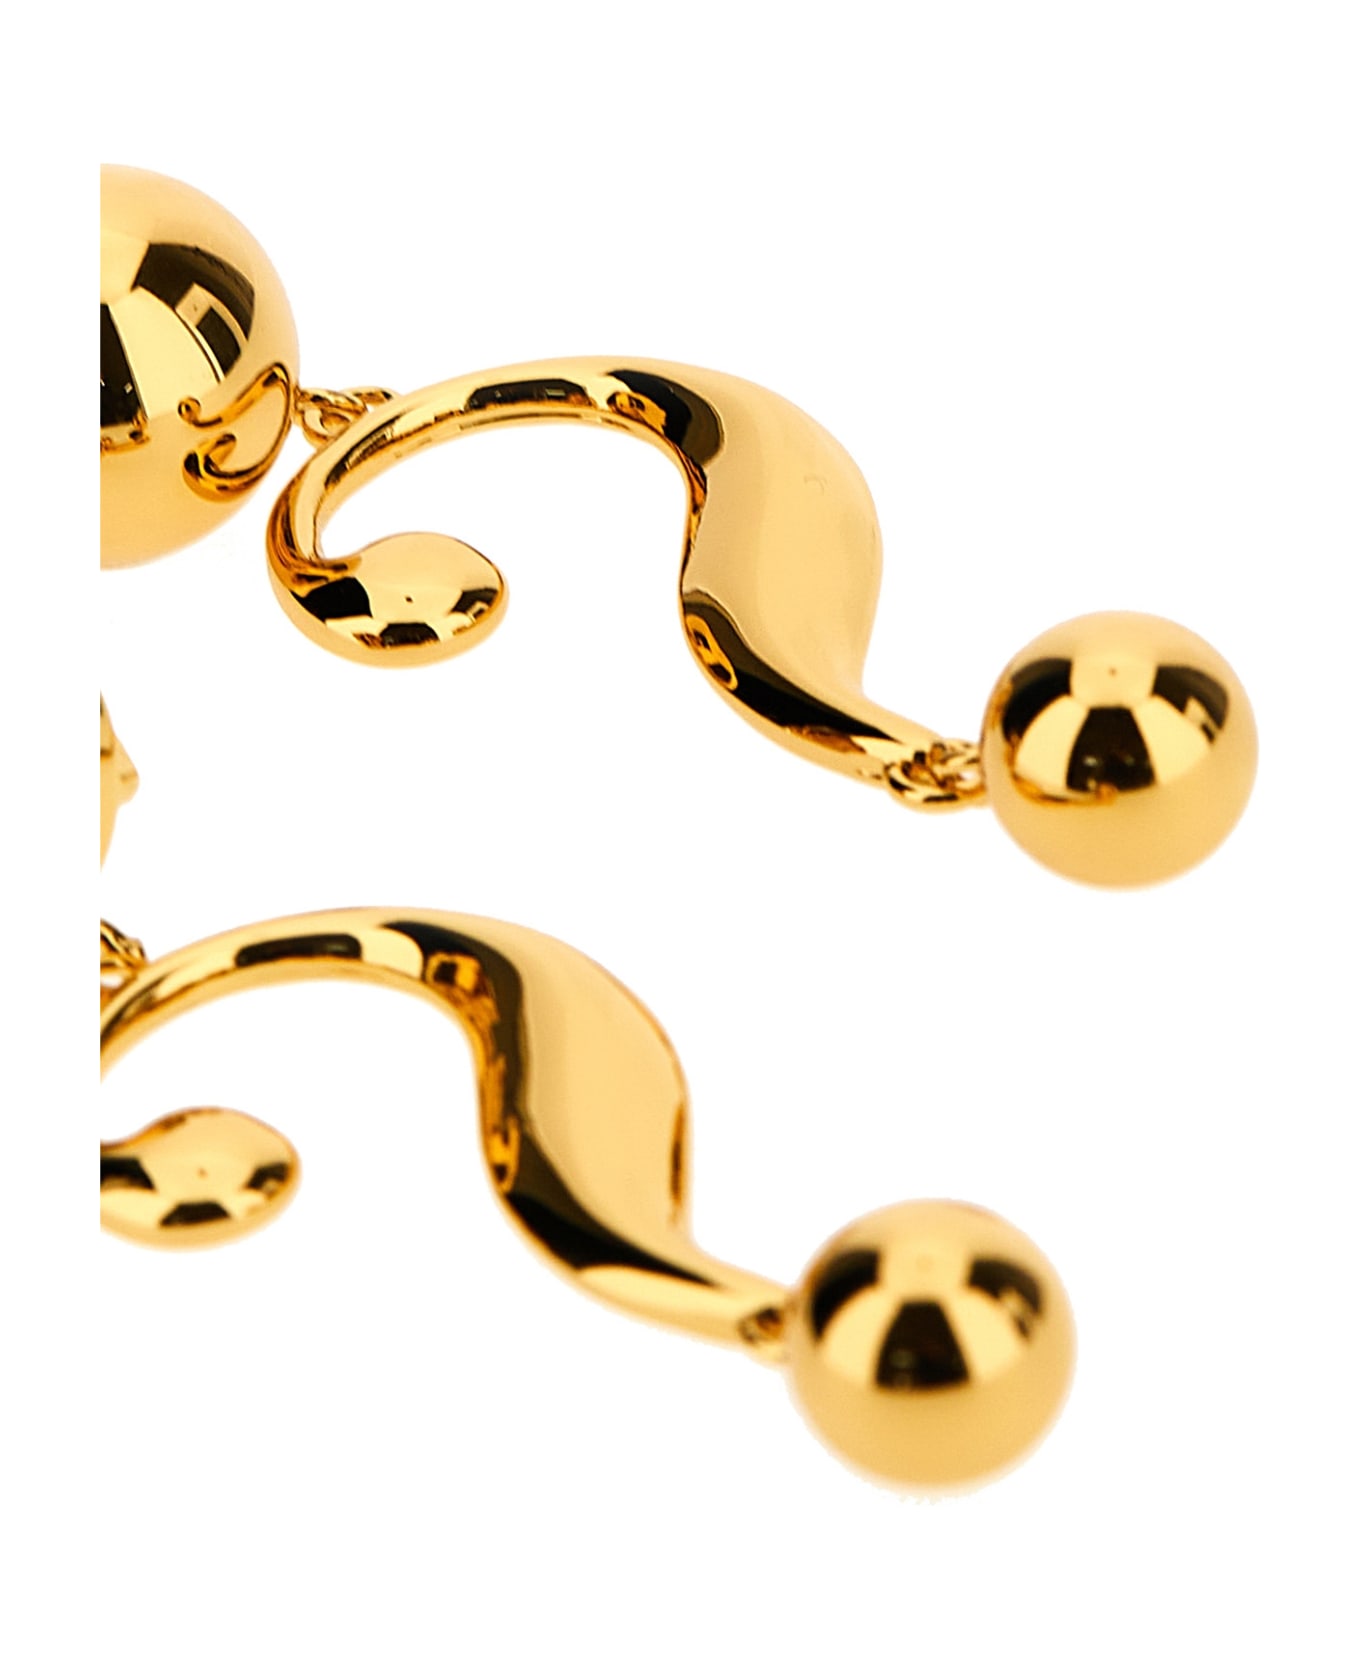 Moschino 'question Mark' Earrings - Gold